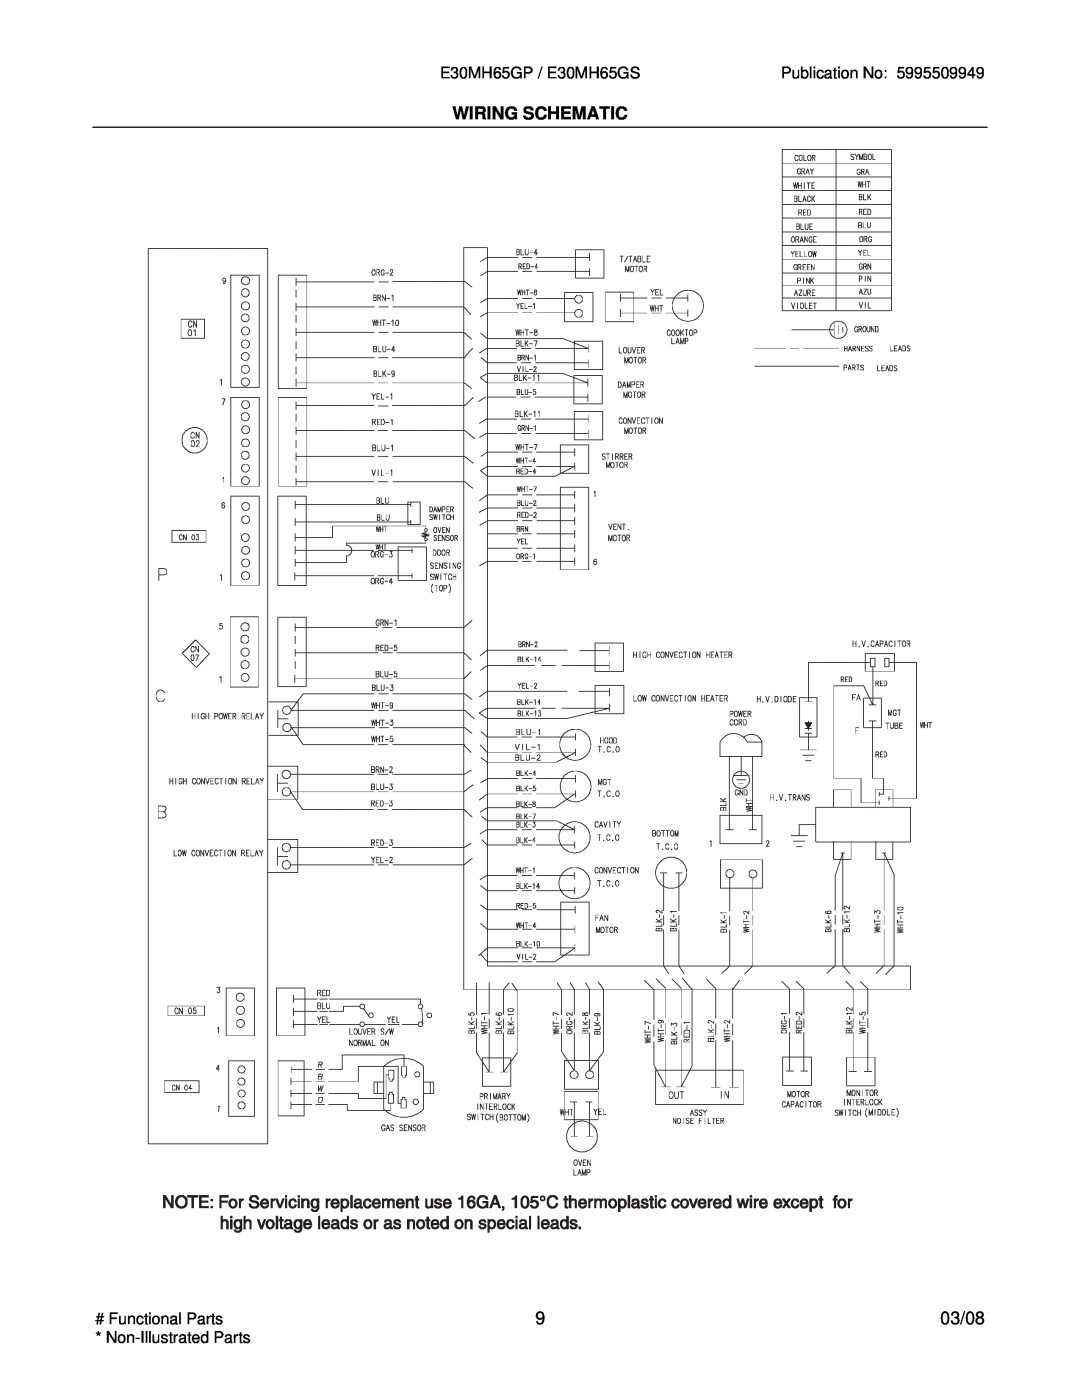 Electrolux E30MH65GSSA, E30MH65GPSA installation instructions Wiring Schematic, 03/08, Publication No 